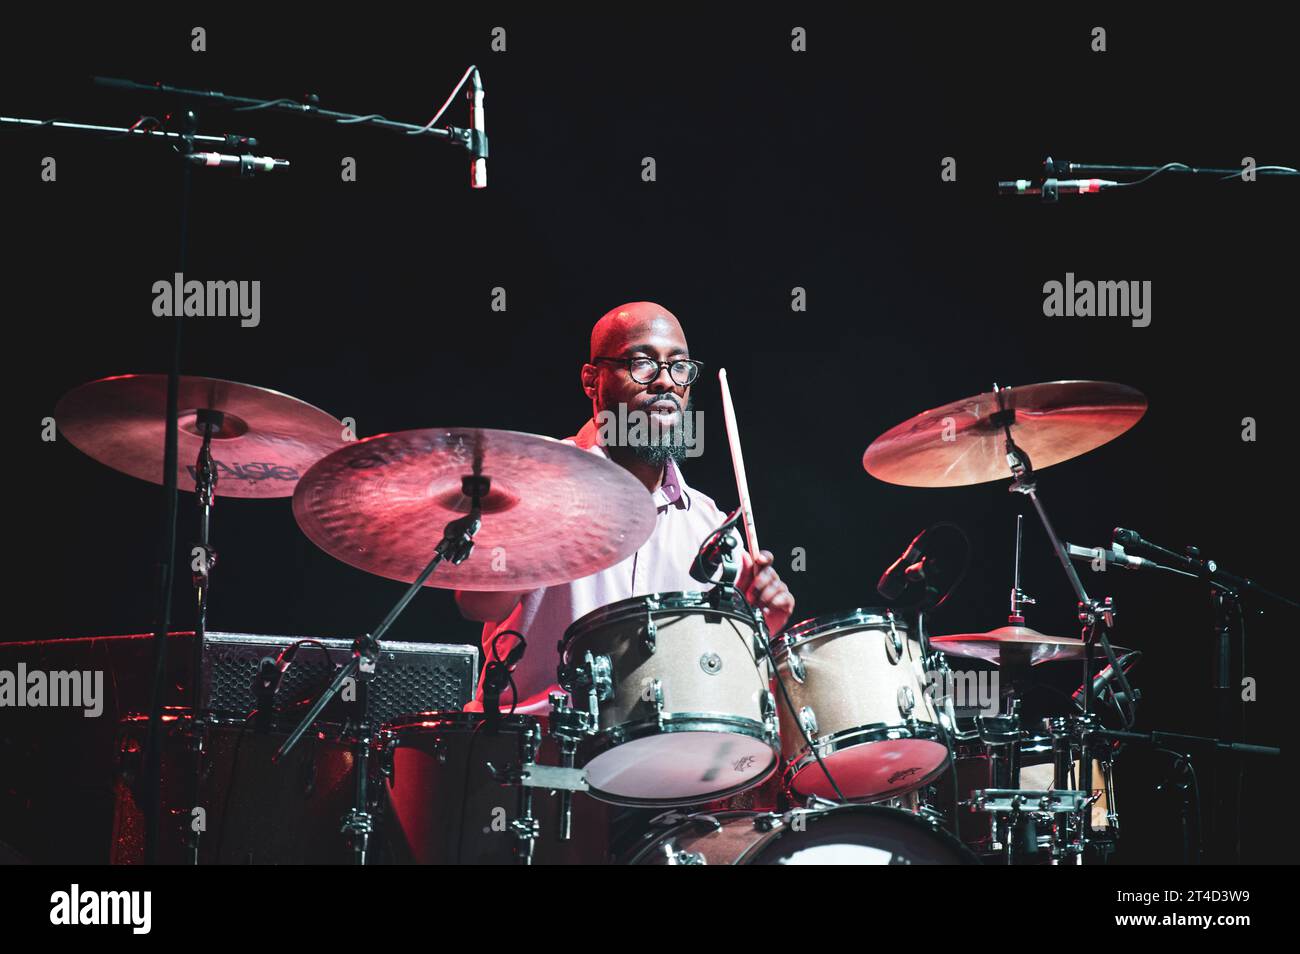 ITALY, TURIN, OCTOBER 29TH: The drummer Anwar Marshall performing live on stage in Turin, during the American jazz/fusion bassist Marcus Miller European tour 2023. Stock Photo